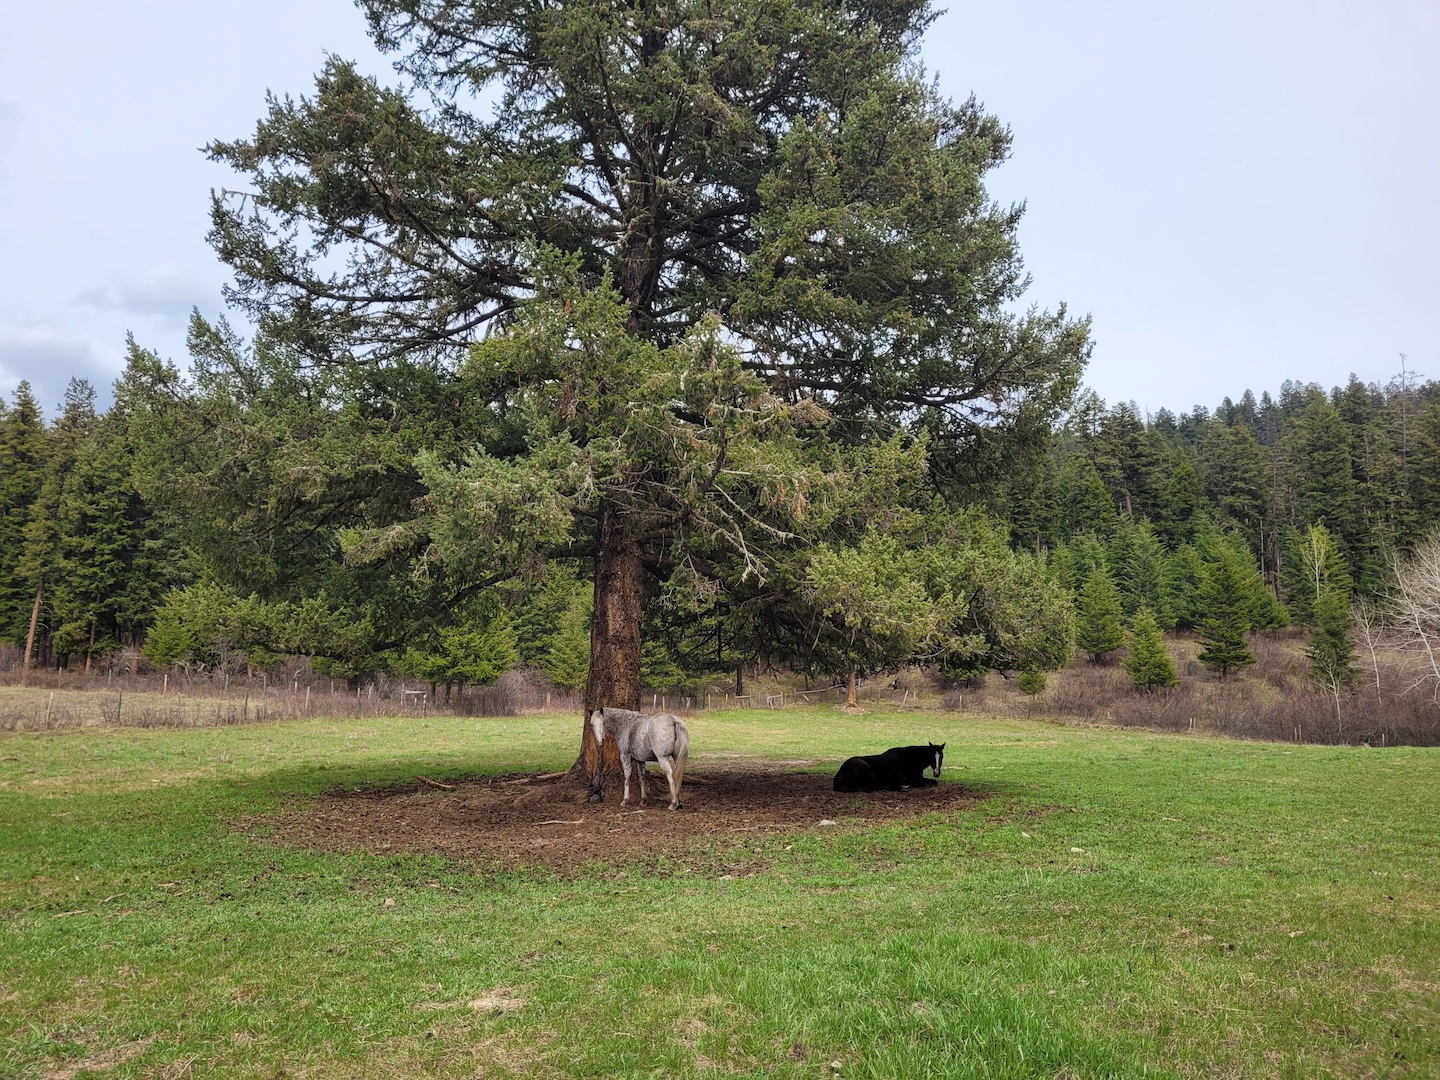 photo of two horses under a tree in a field, one lying down and one looking back at the camera